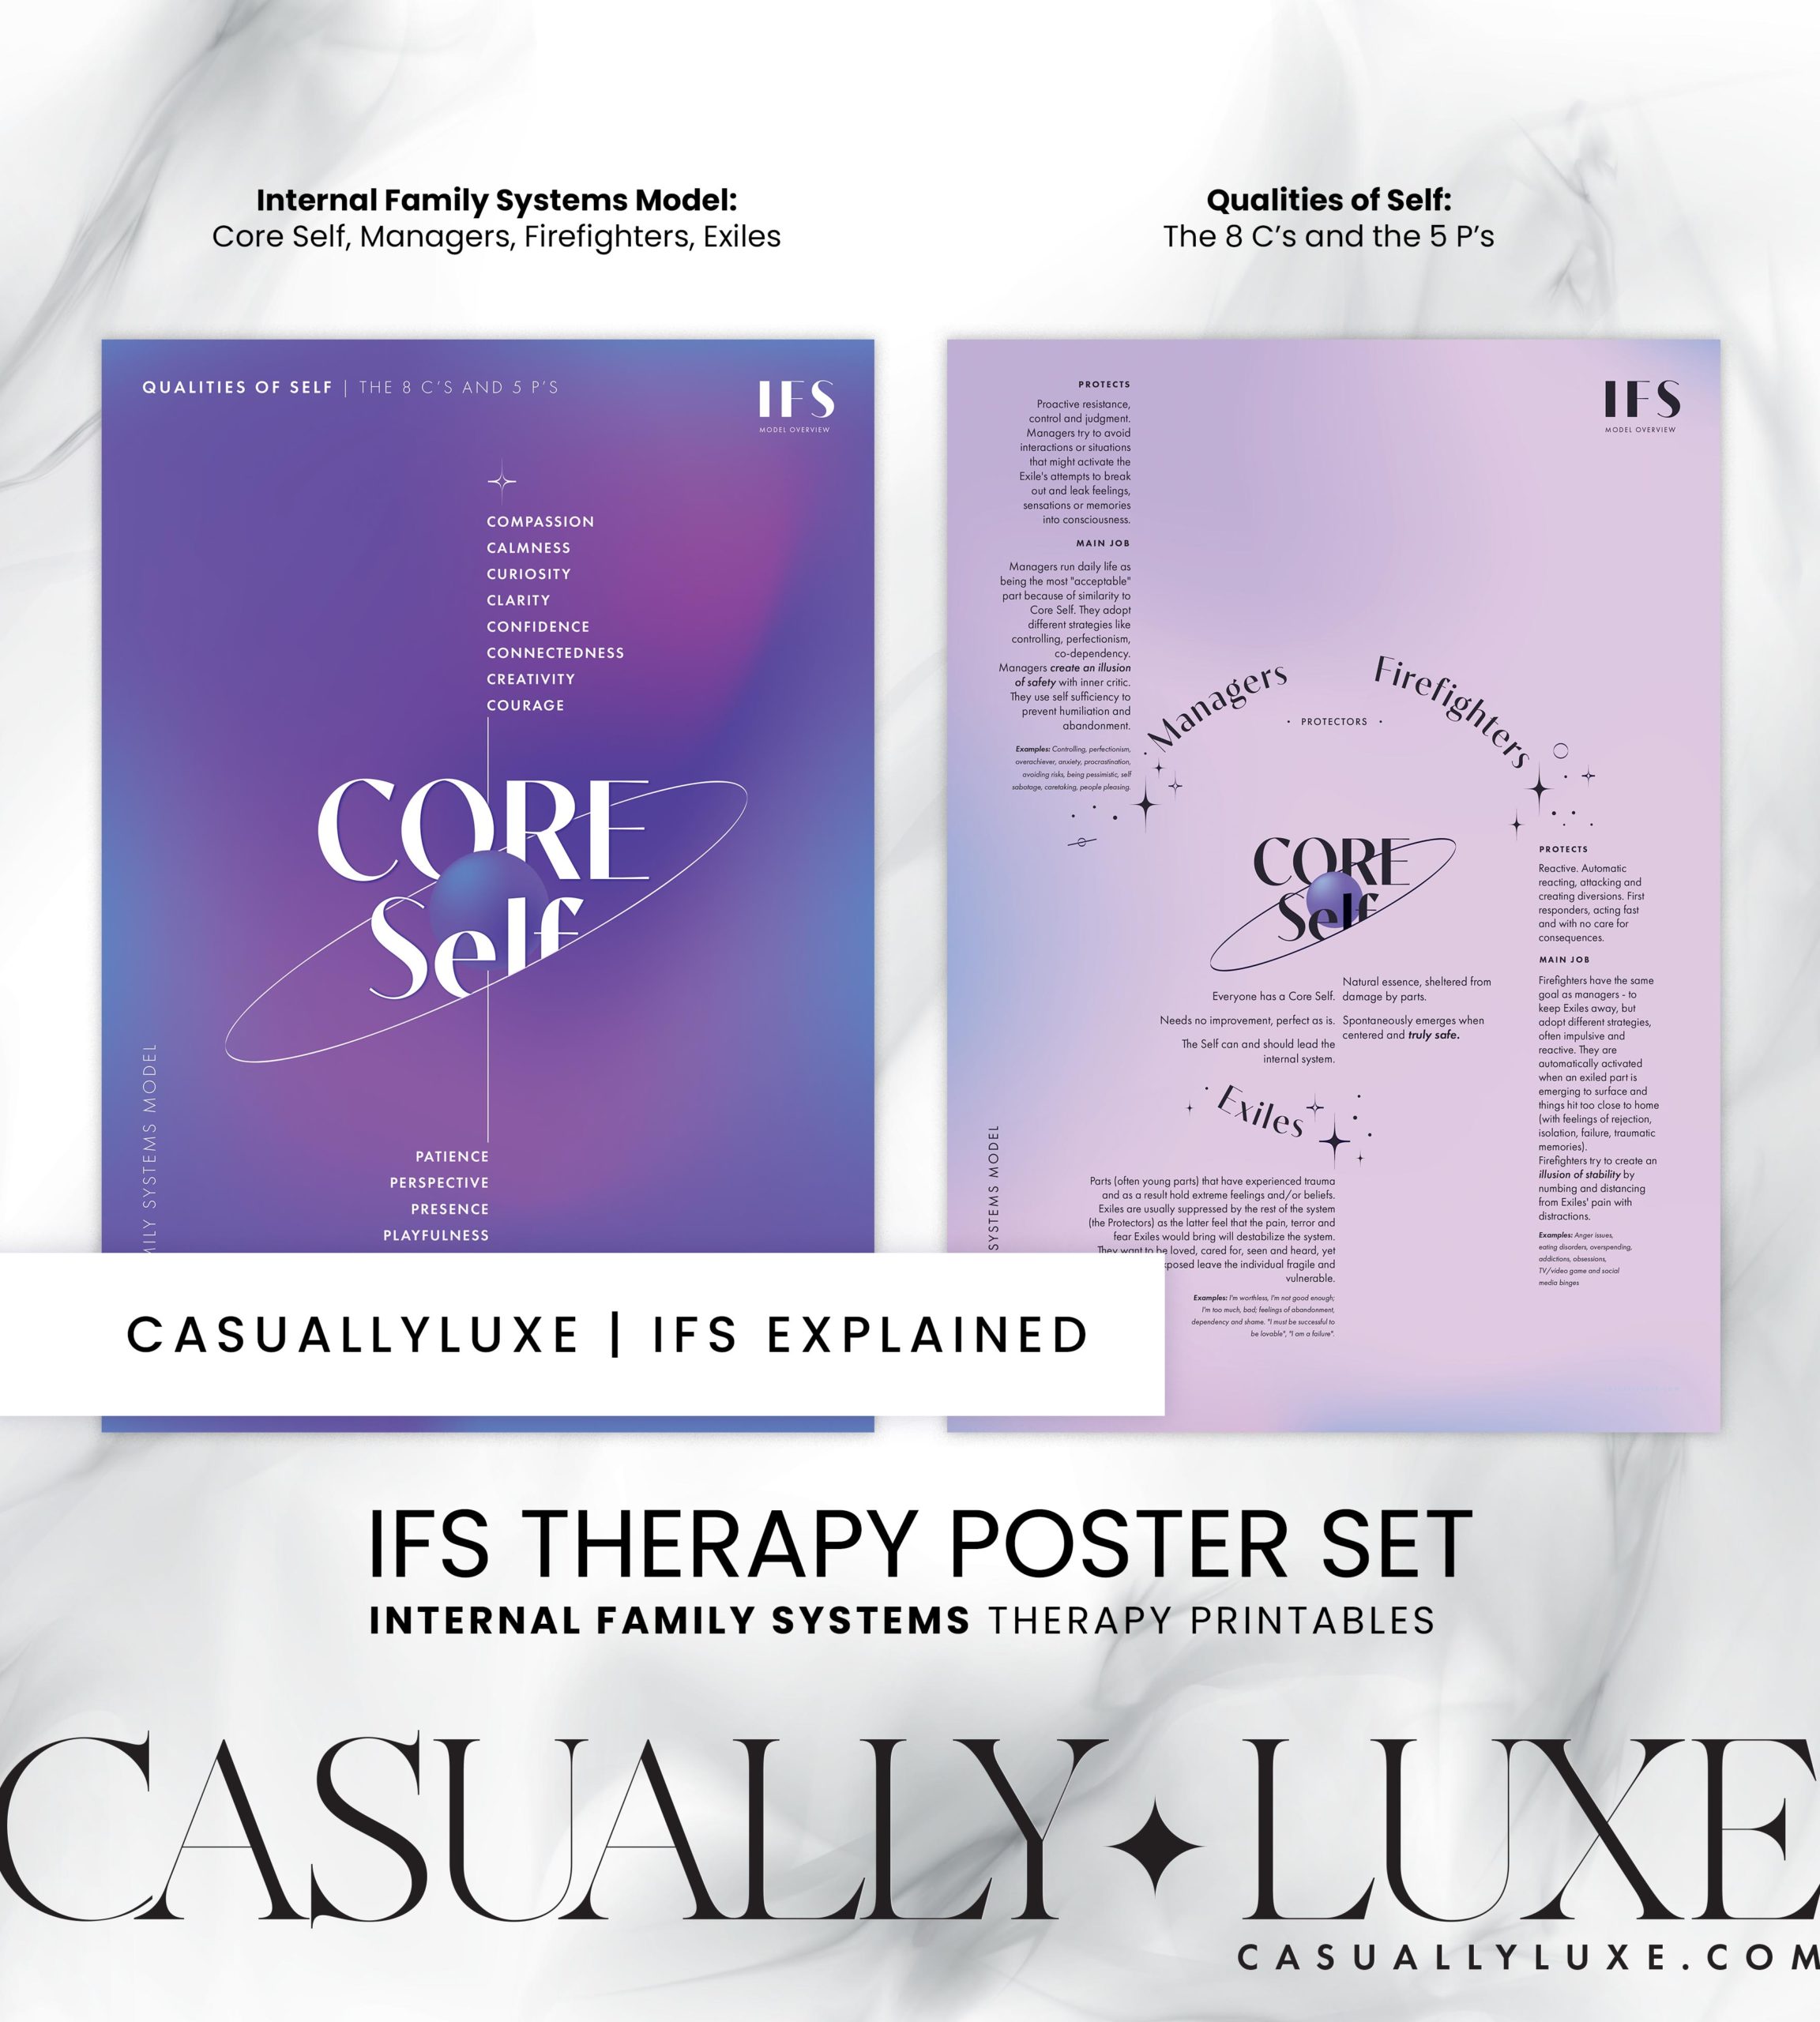 Internal Family Systems Explained - Printable Posters by CasuallyLuxe